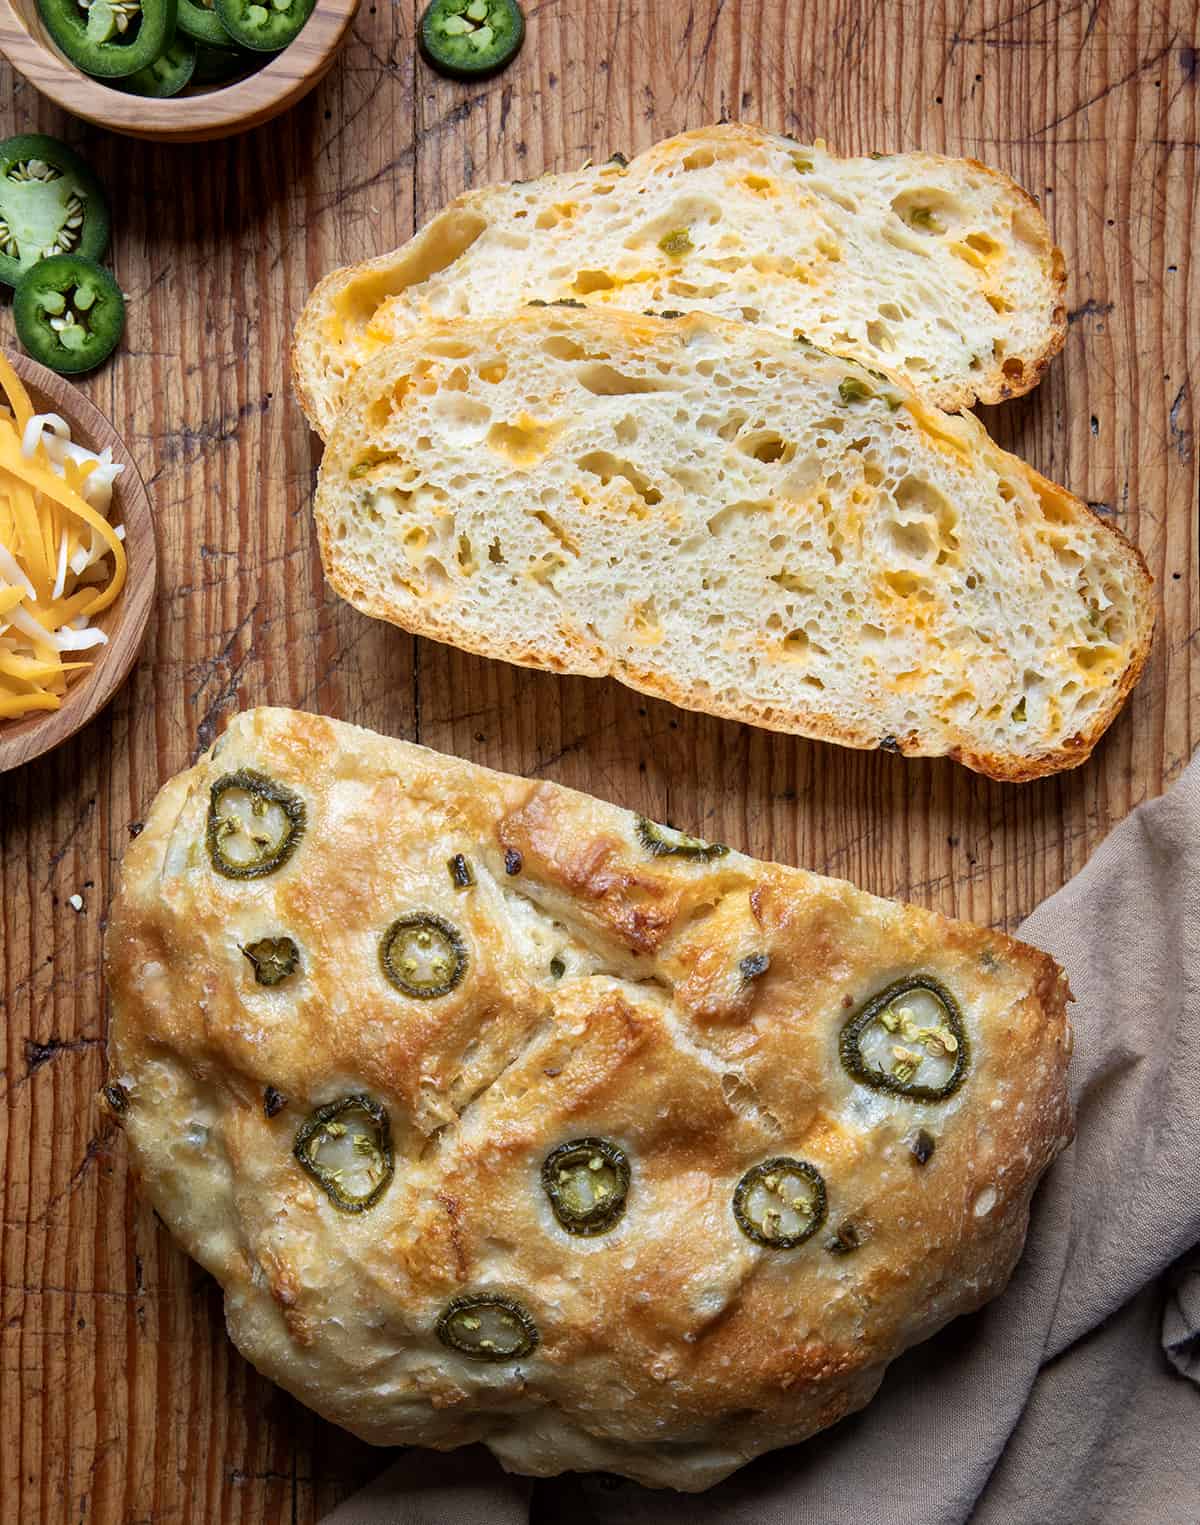 Loaf of Jalapeno Cheddar Bread on a cutting board with a few pieces of the bread cut.